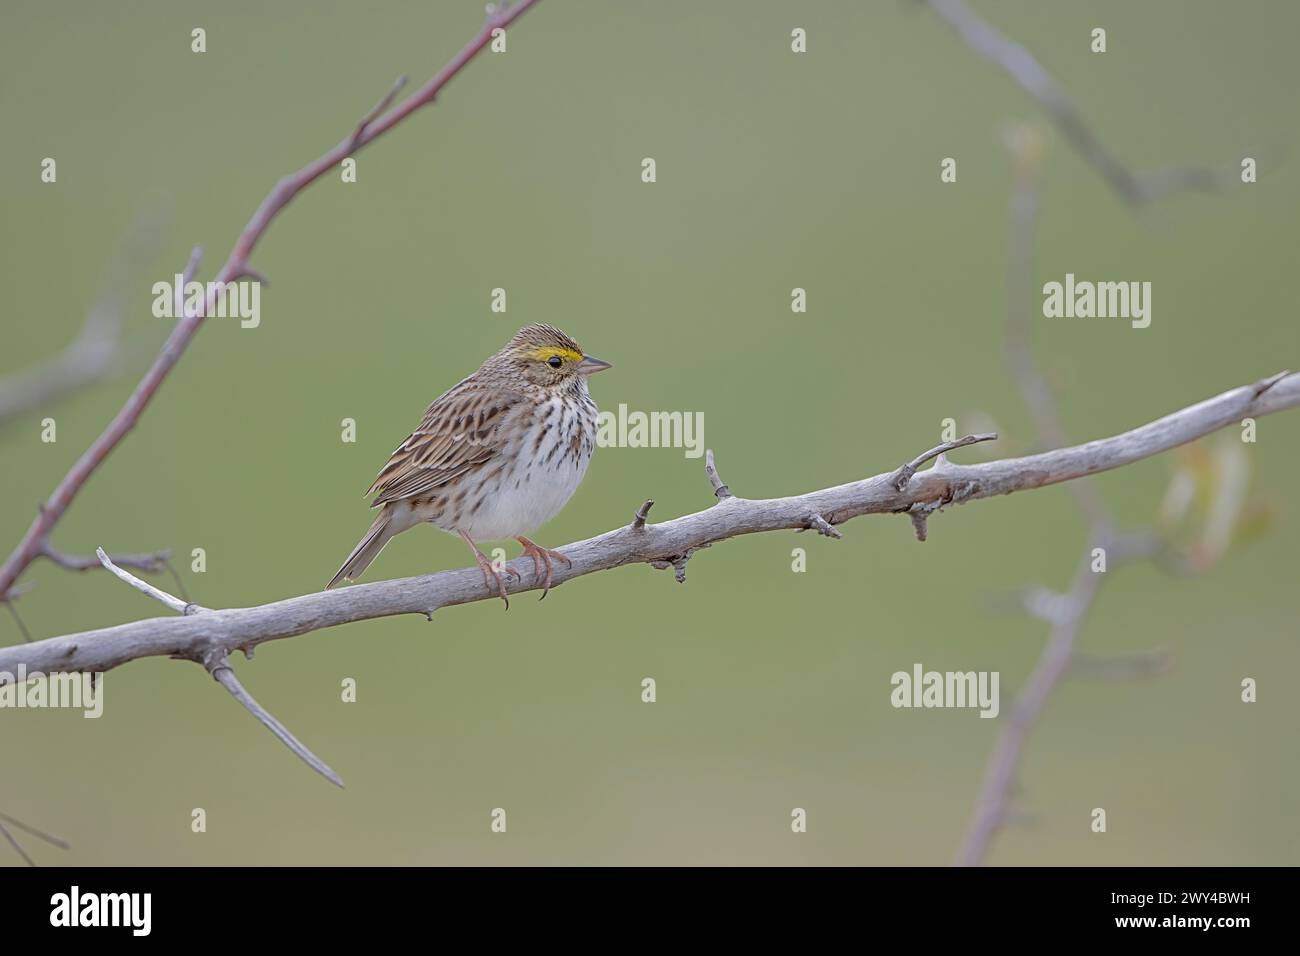 A Savannah Sparrow (Passerculus sandwichensis) sits on a branch looking to the right of the frame Stock Photo